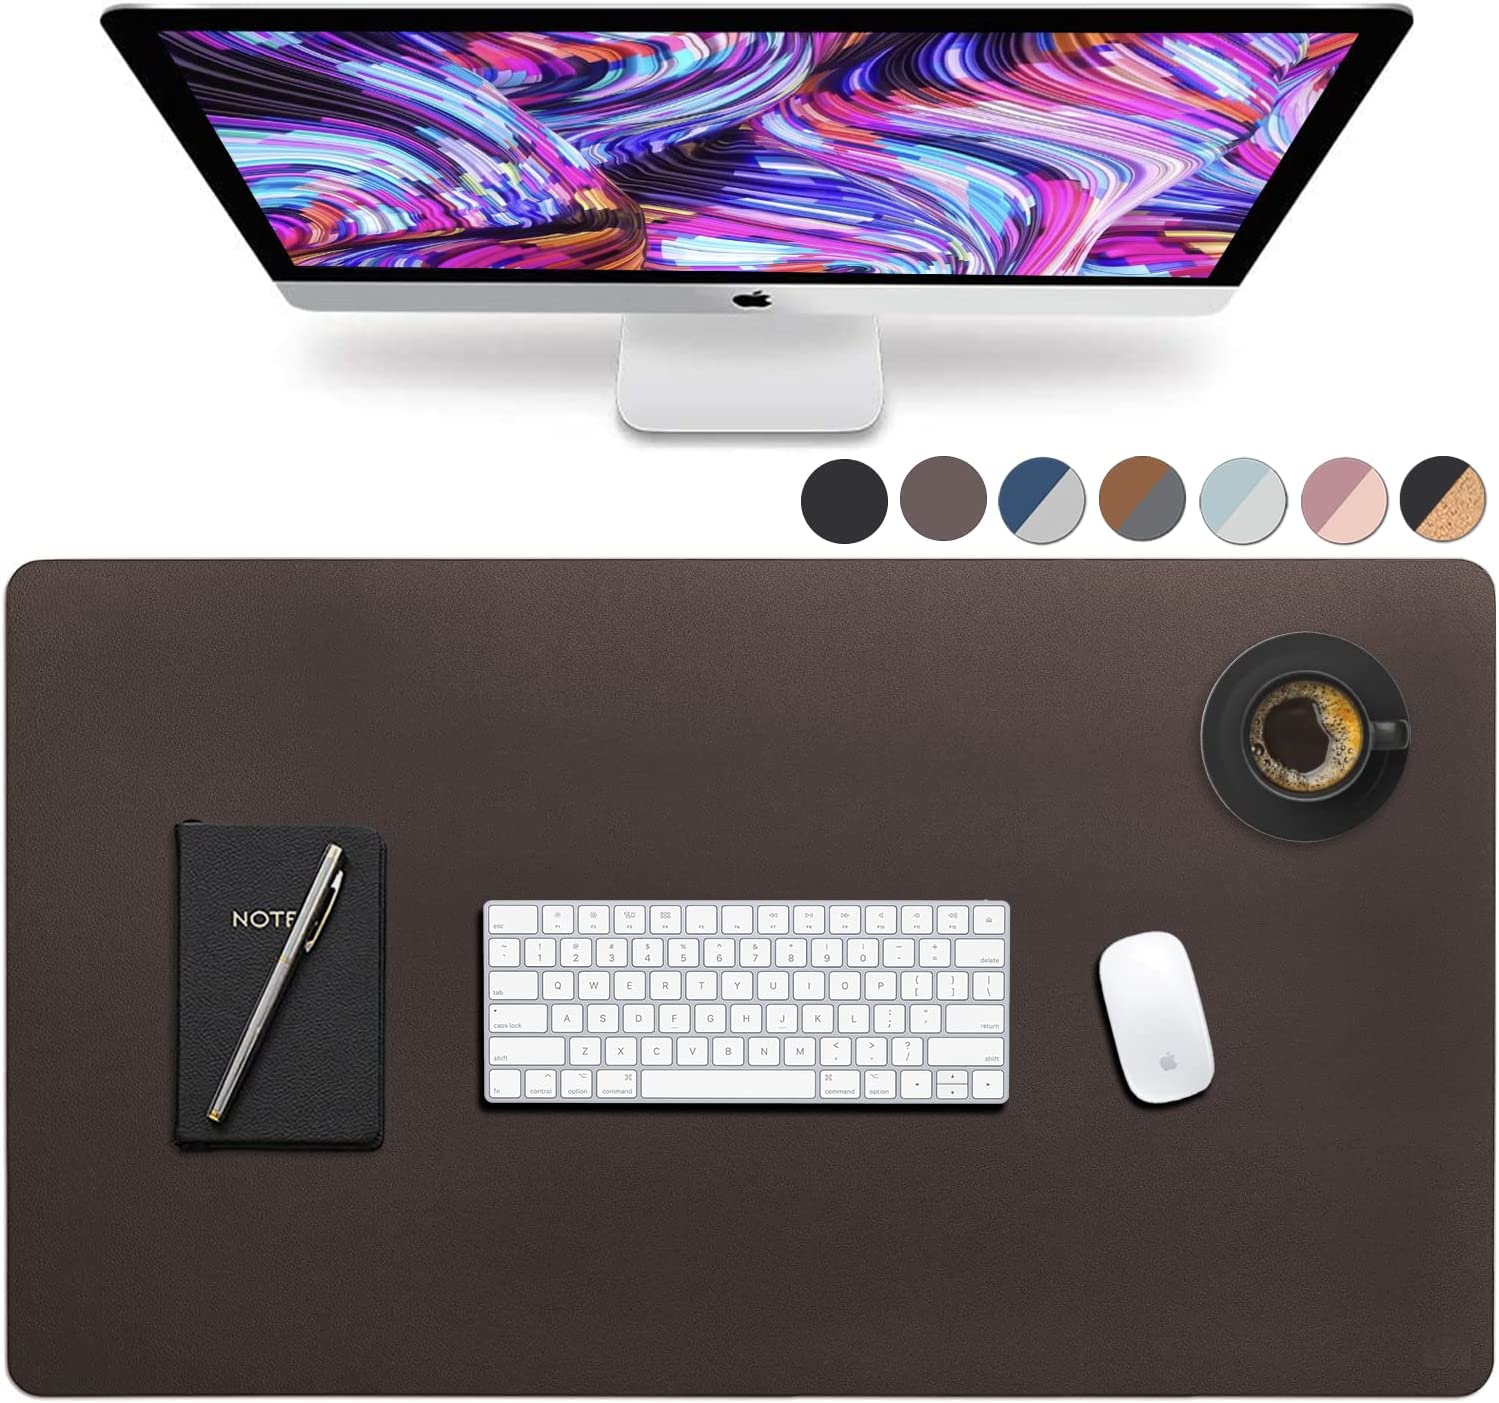 Vine Creations Roll-Up Faux Leather Desk Mat